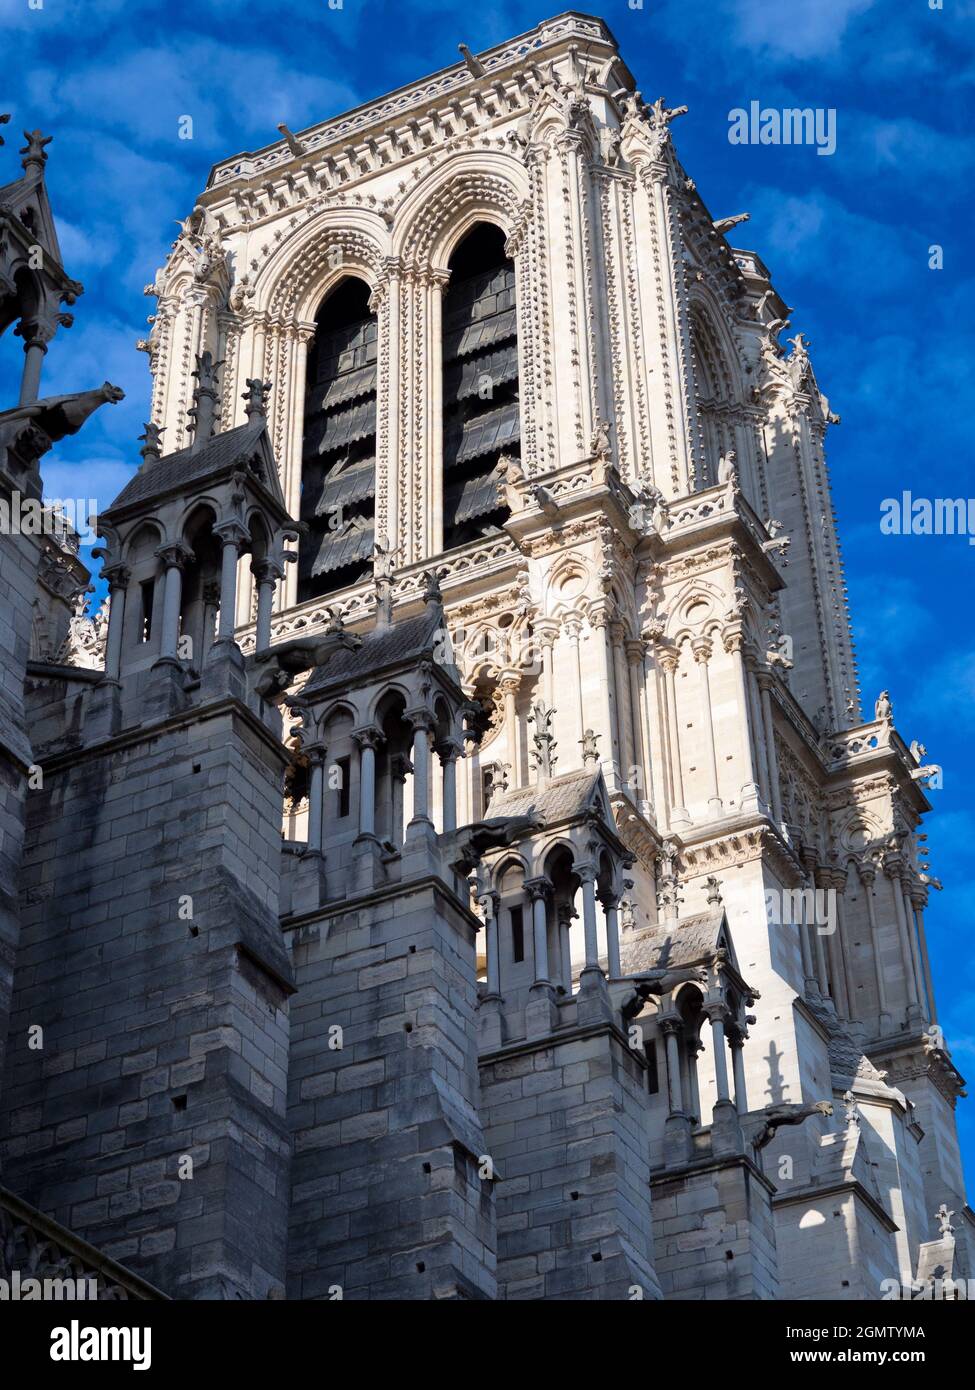 Paris, France - 19 September 2018   Notre-Dame,the famous medieval Catholic cathedra, is located on the ële de la Cit in the fourth arrondissement of Stock Photo